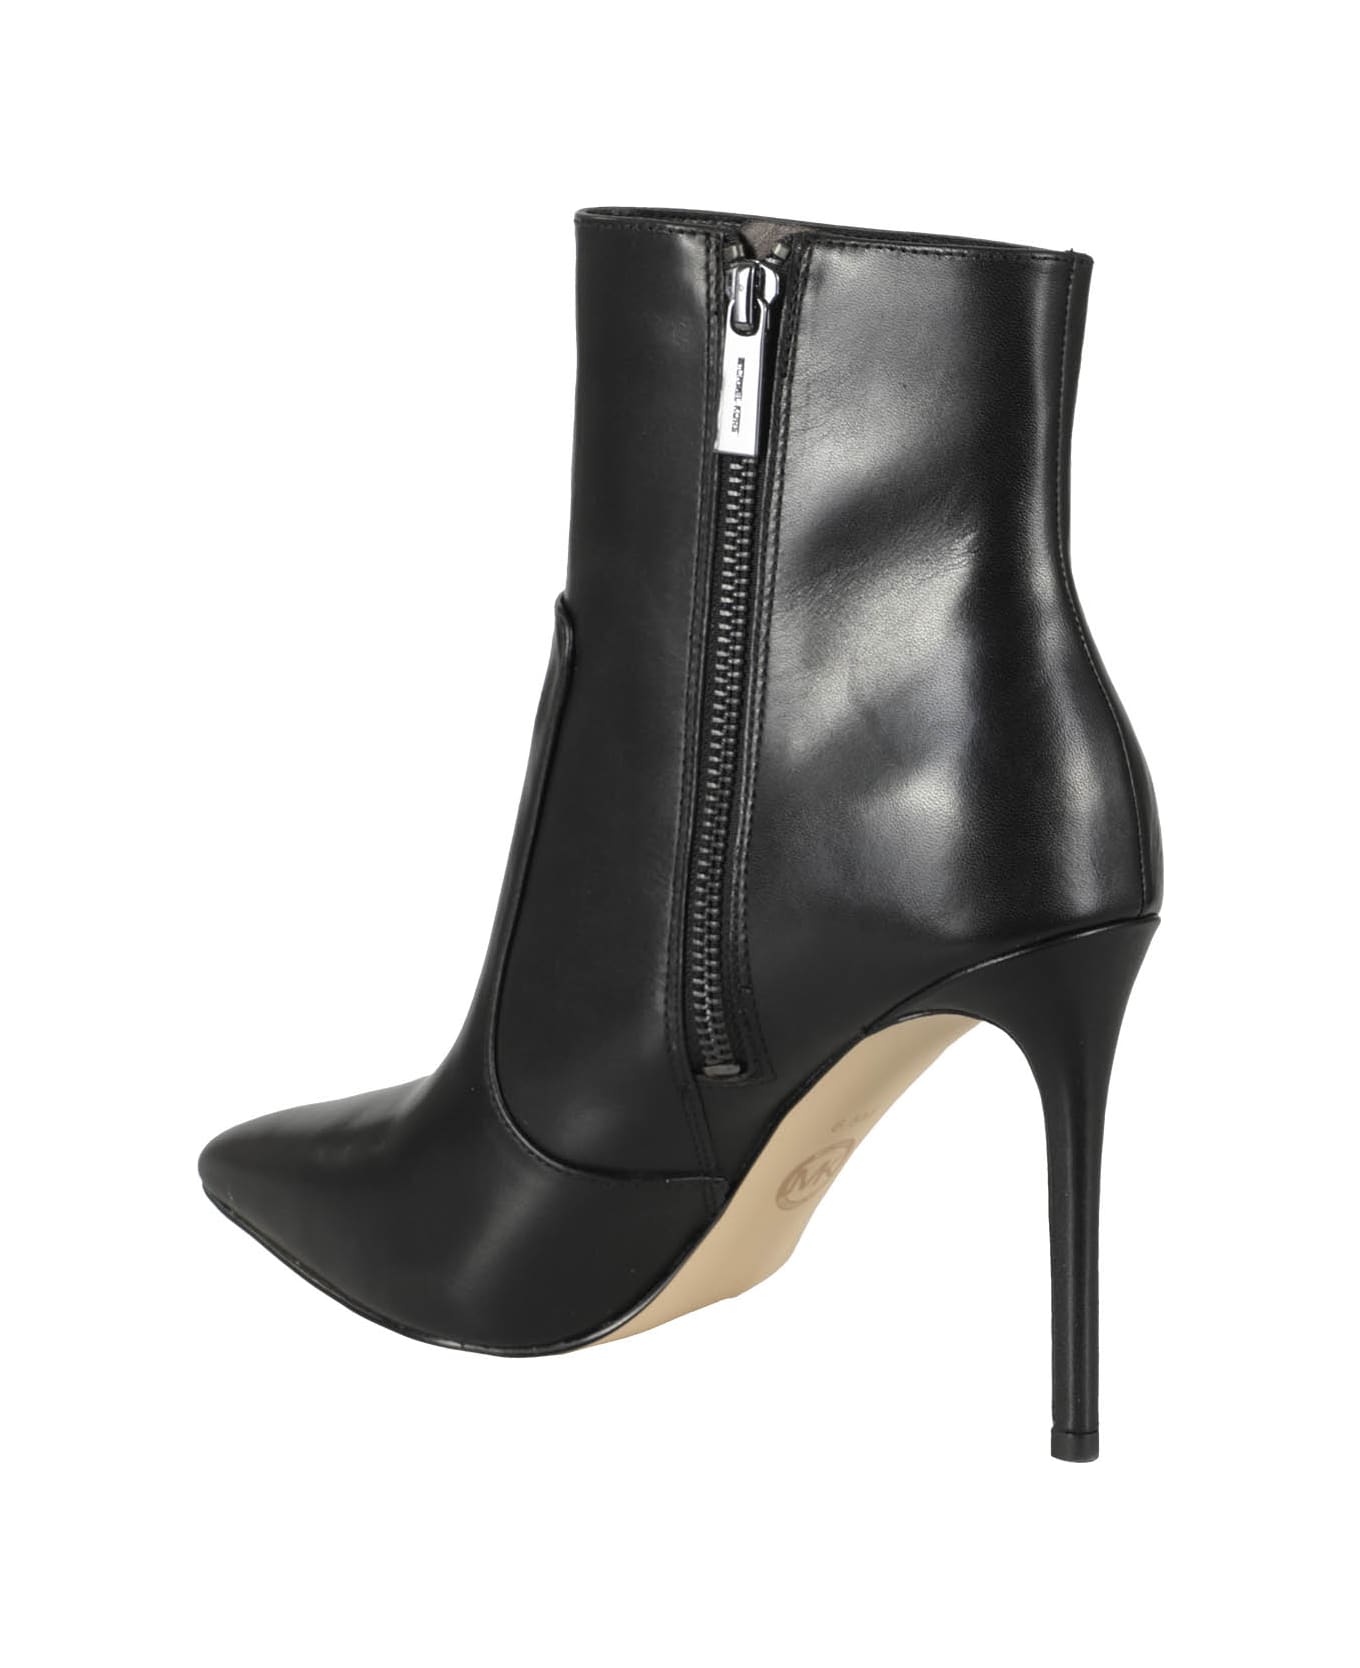 MICHAEL Michael Kors Pointed Toe Zipped Ankle Boots | italist, ALWAYS ...